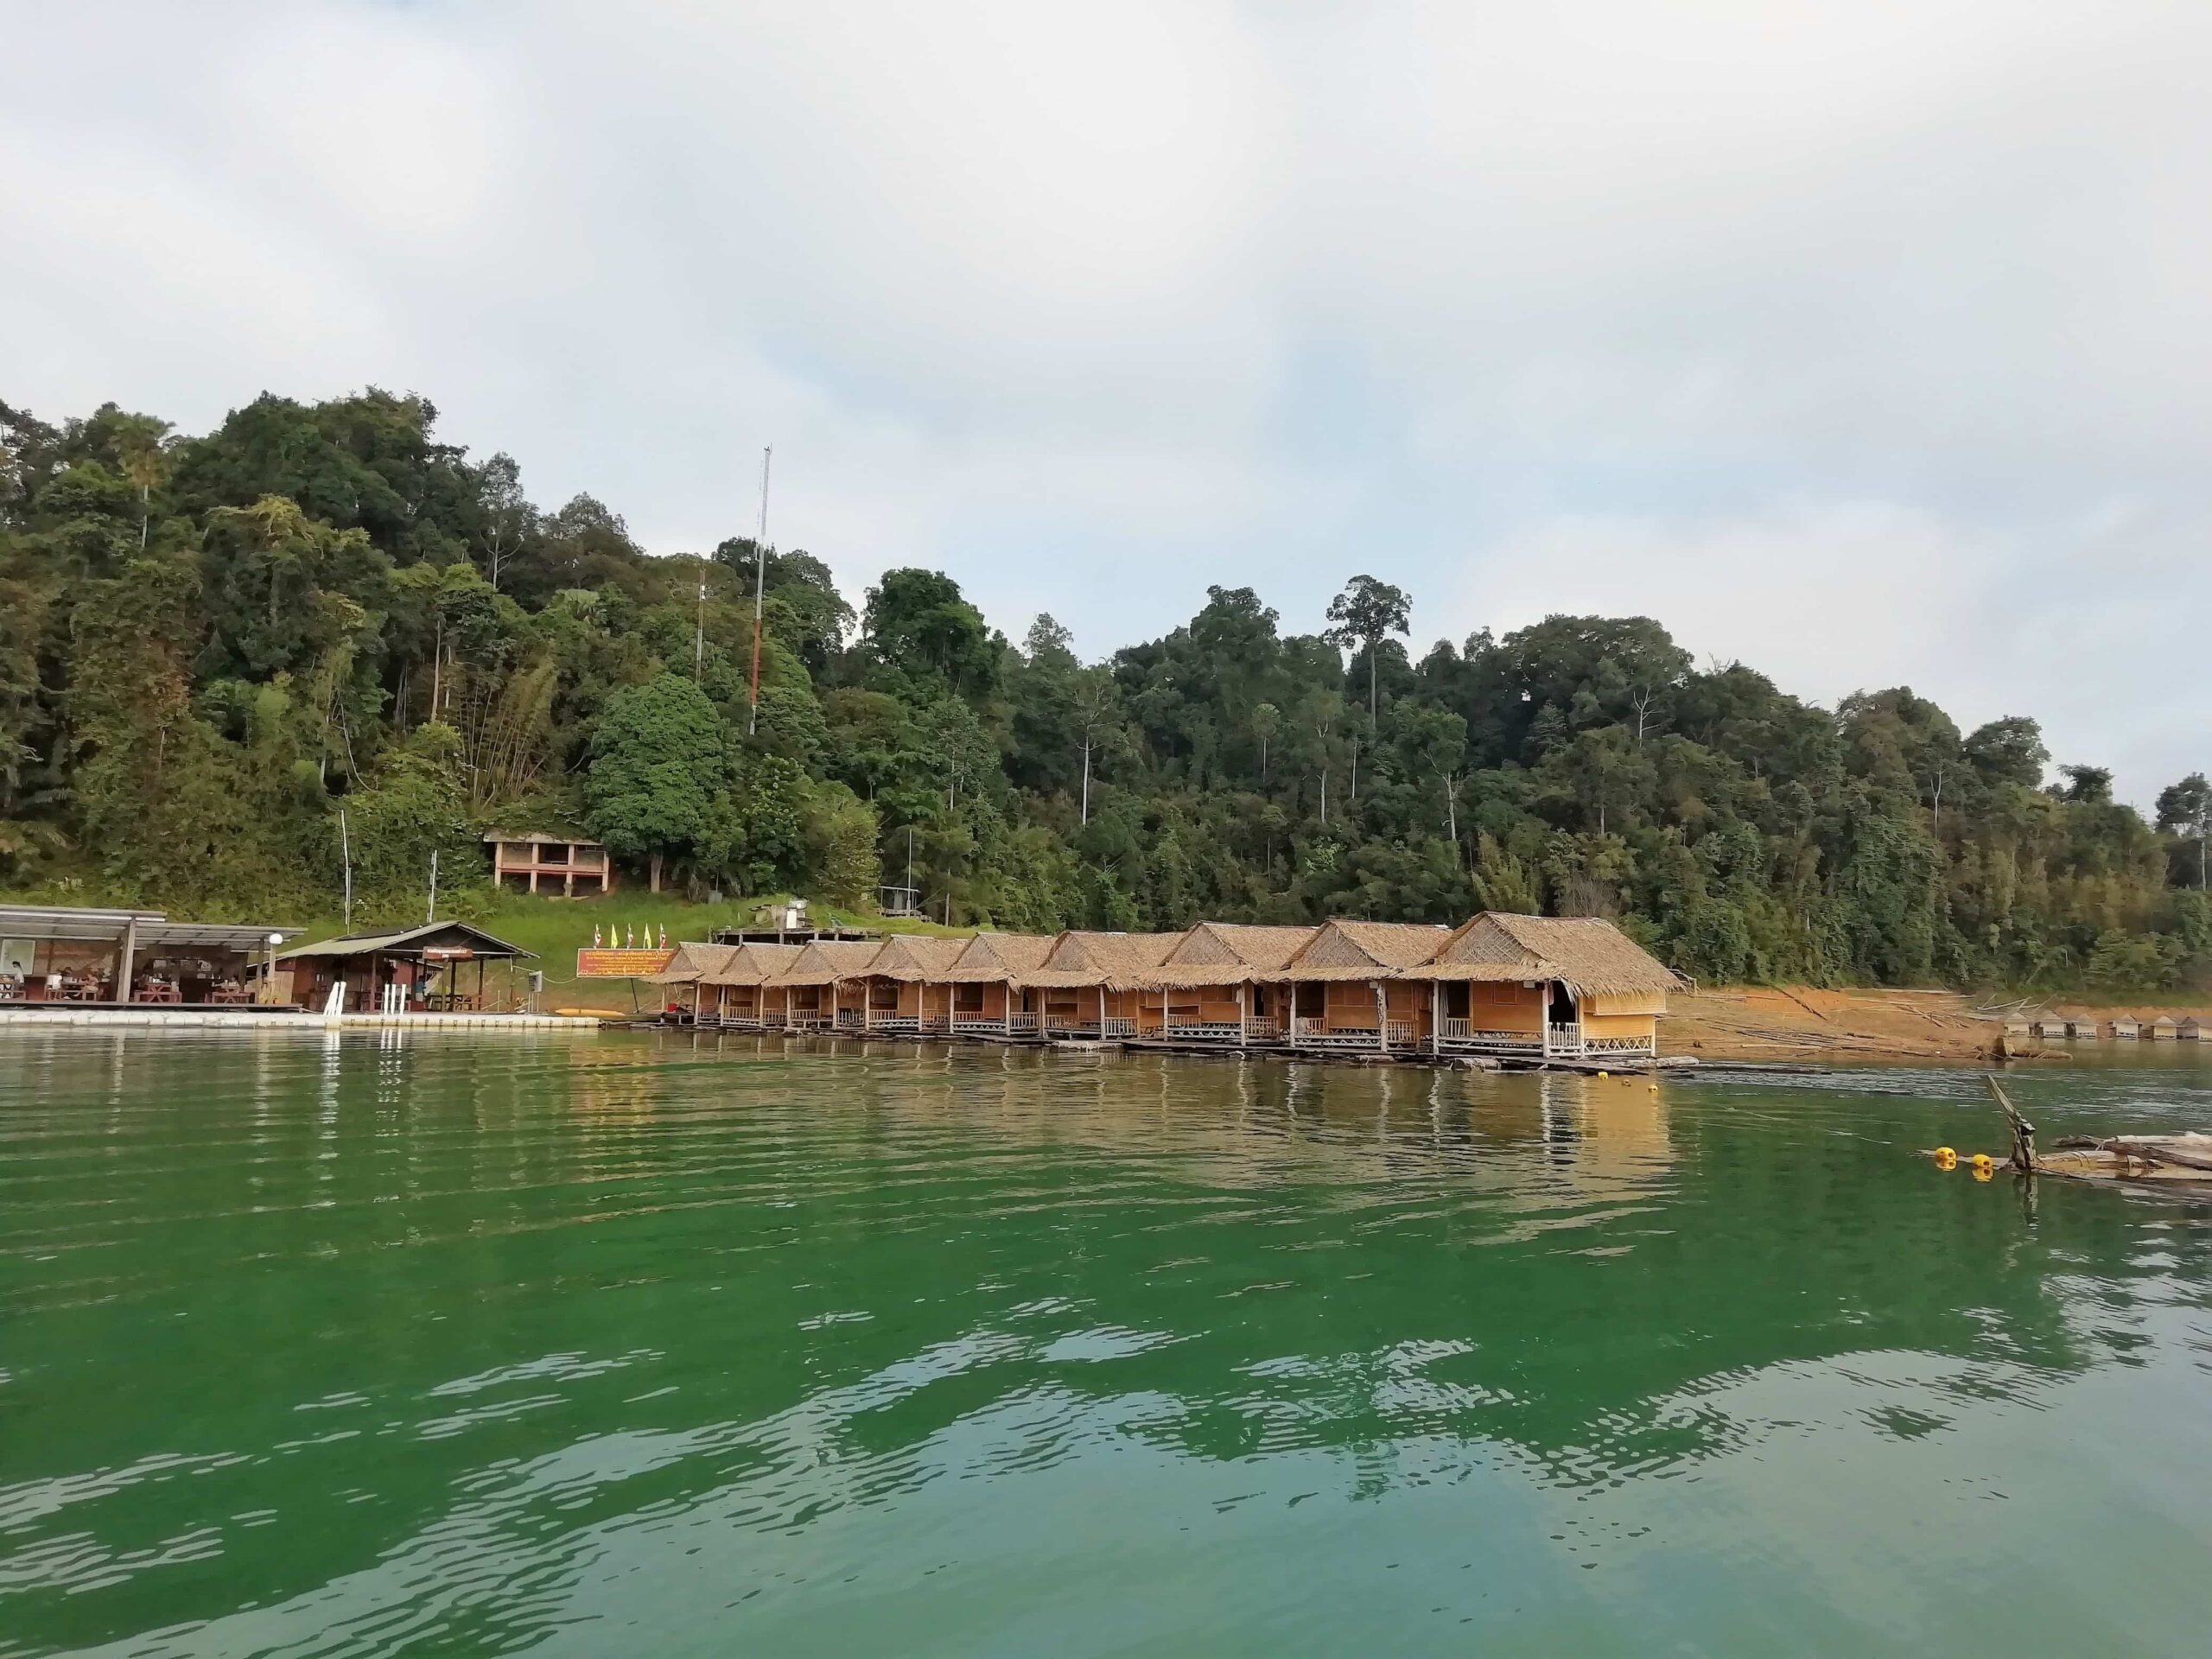 Our raft huts in Khao Sok National Park, Thailand 2022 travel